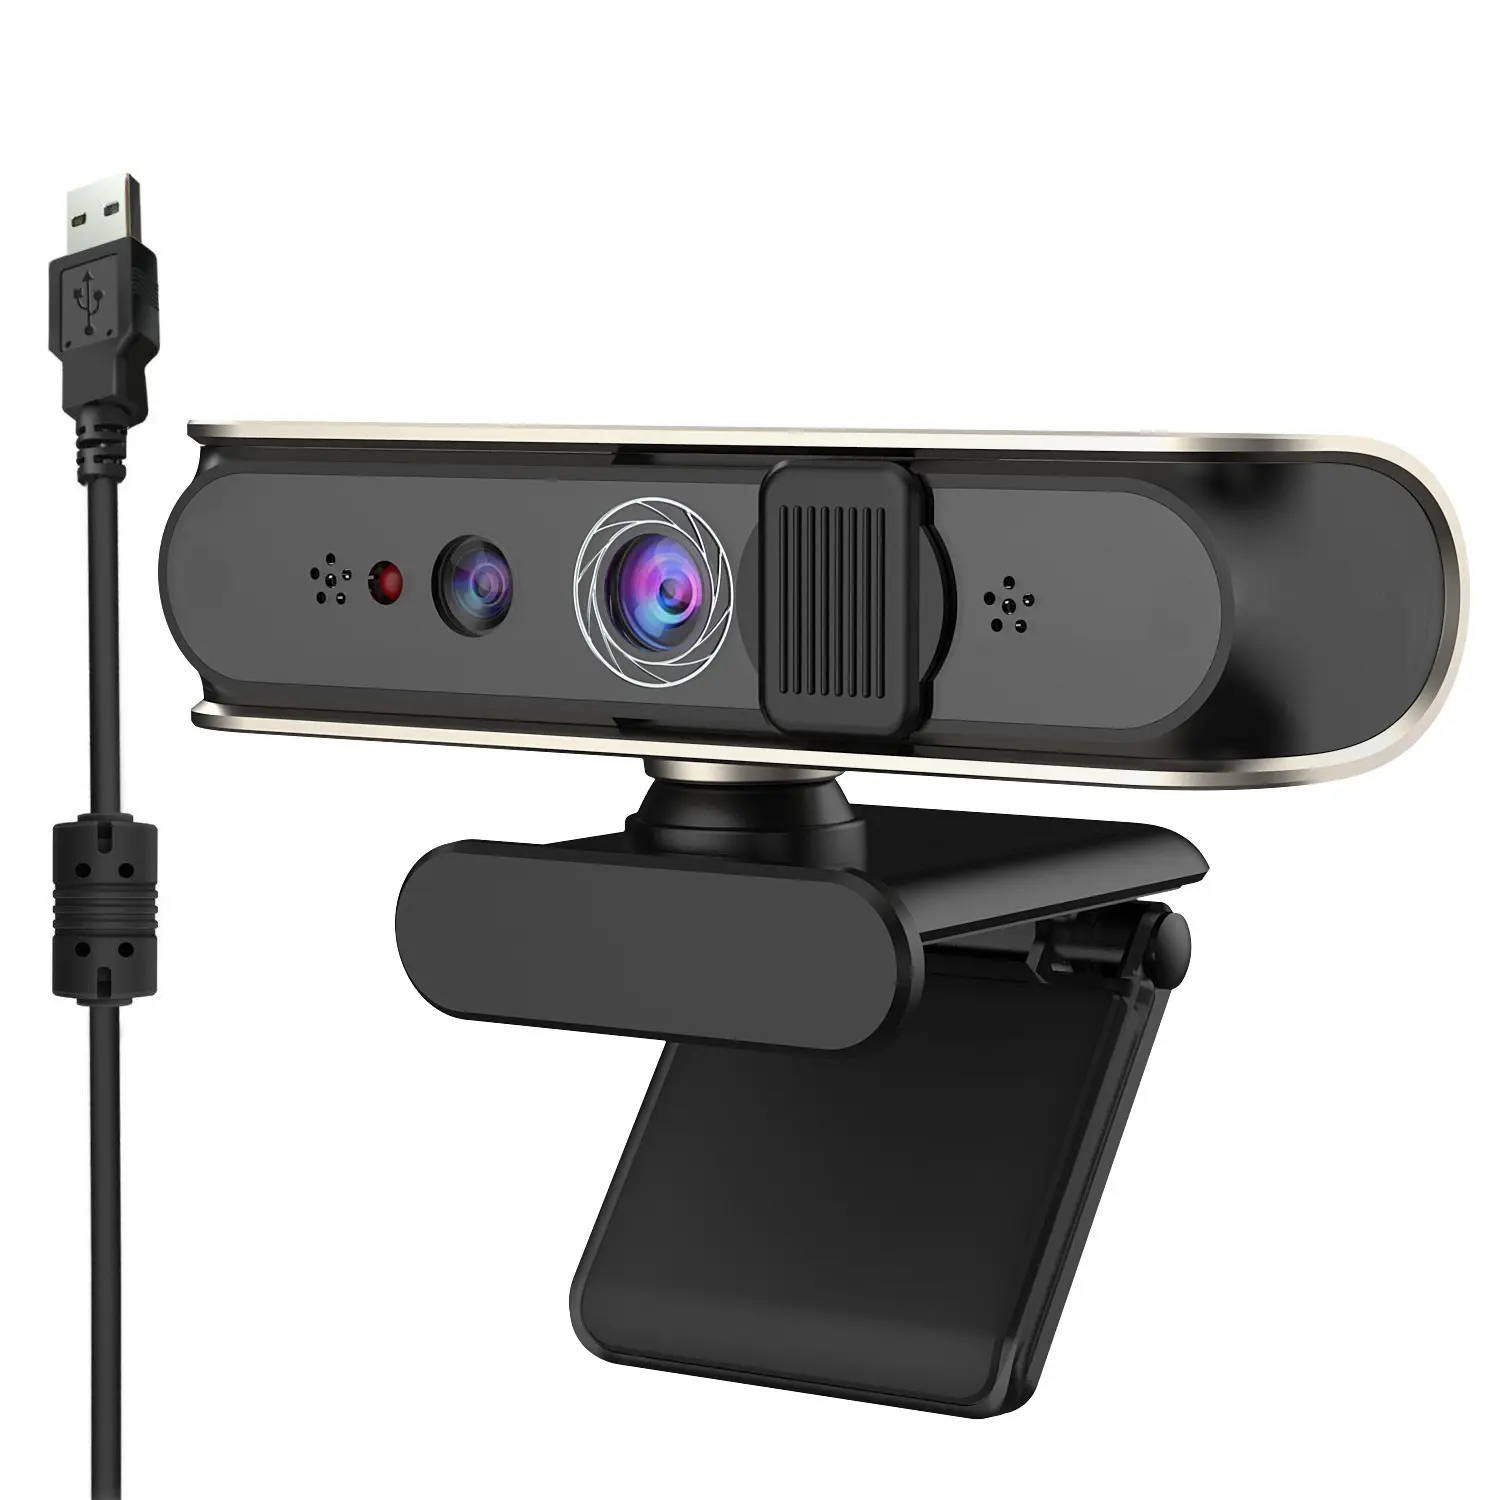 New Full HD Web Conferencing Cameras 1080P Webcam With Microphone USB Plug Video Cameras For PC Computer Conference